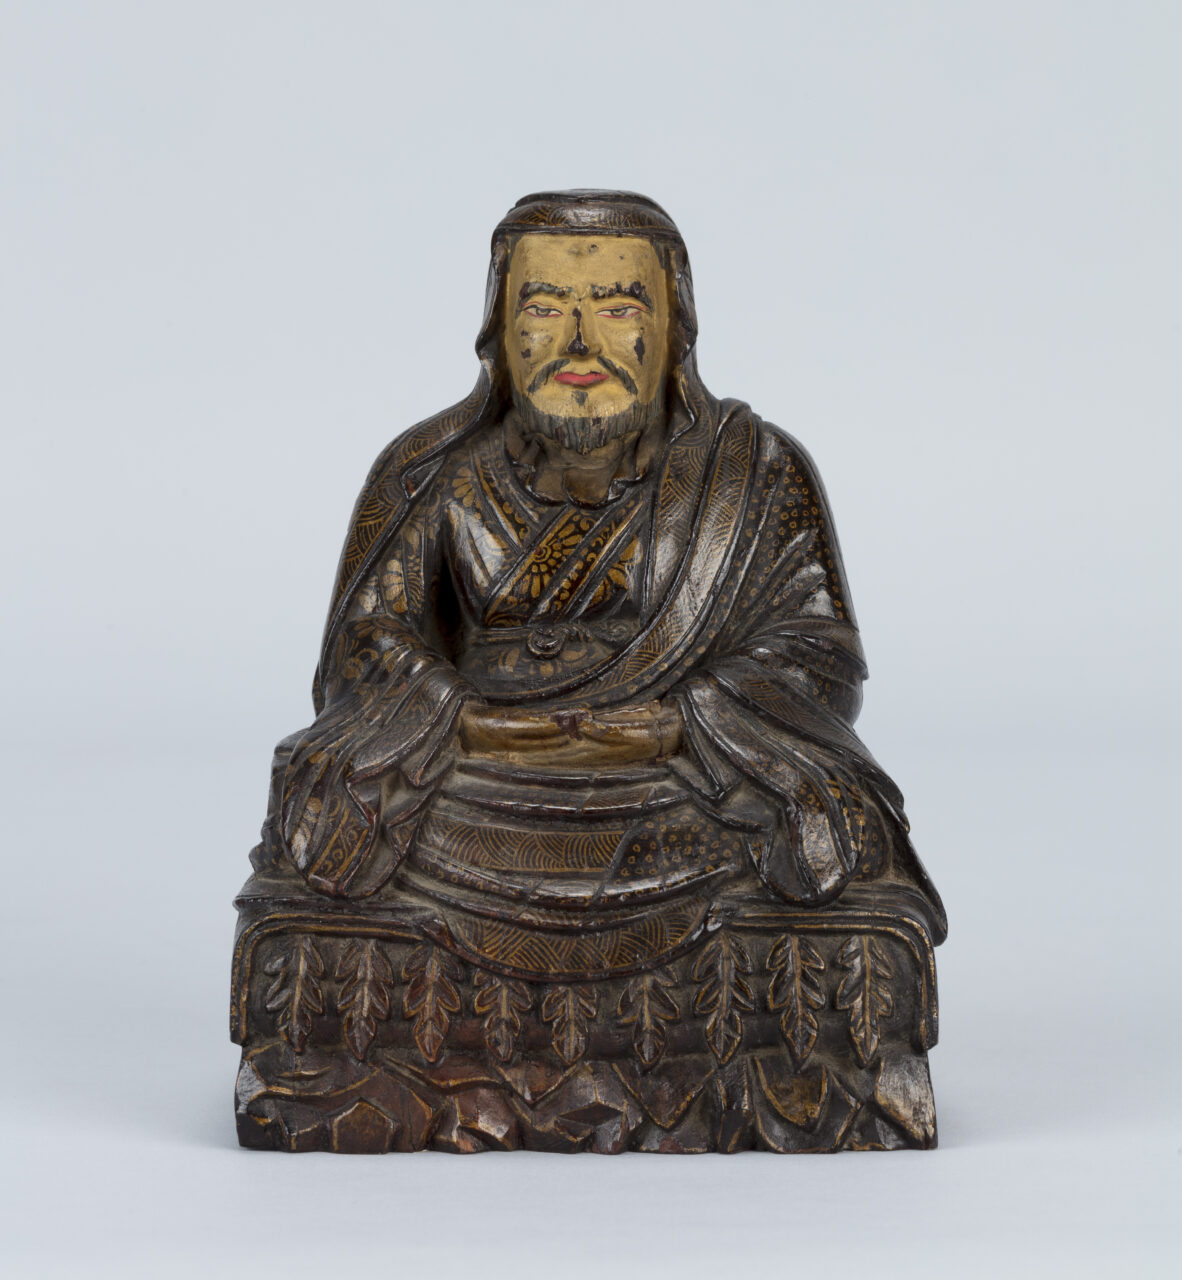 Polychrome sculpture depicting bearded Enlightened Teacher wearing pleated robes painted with floral motif at chest